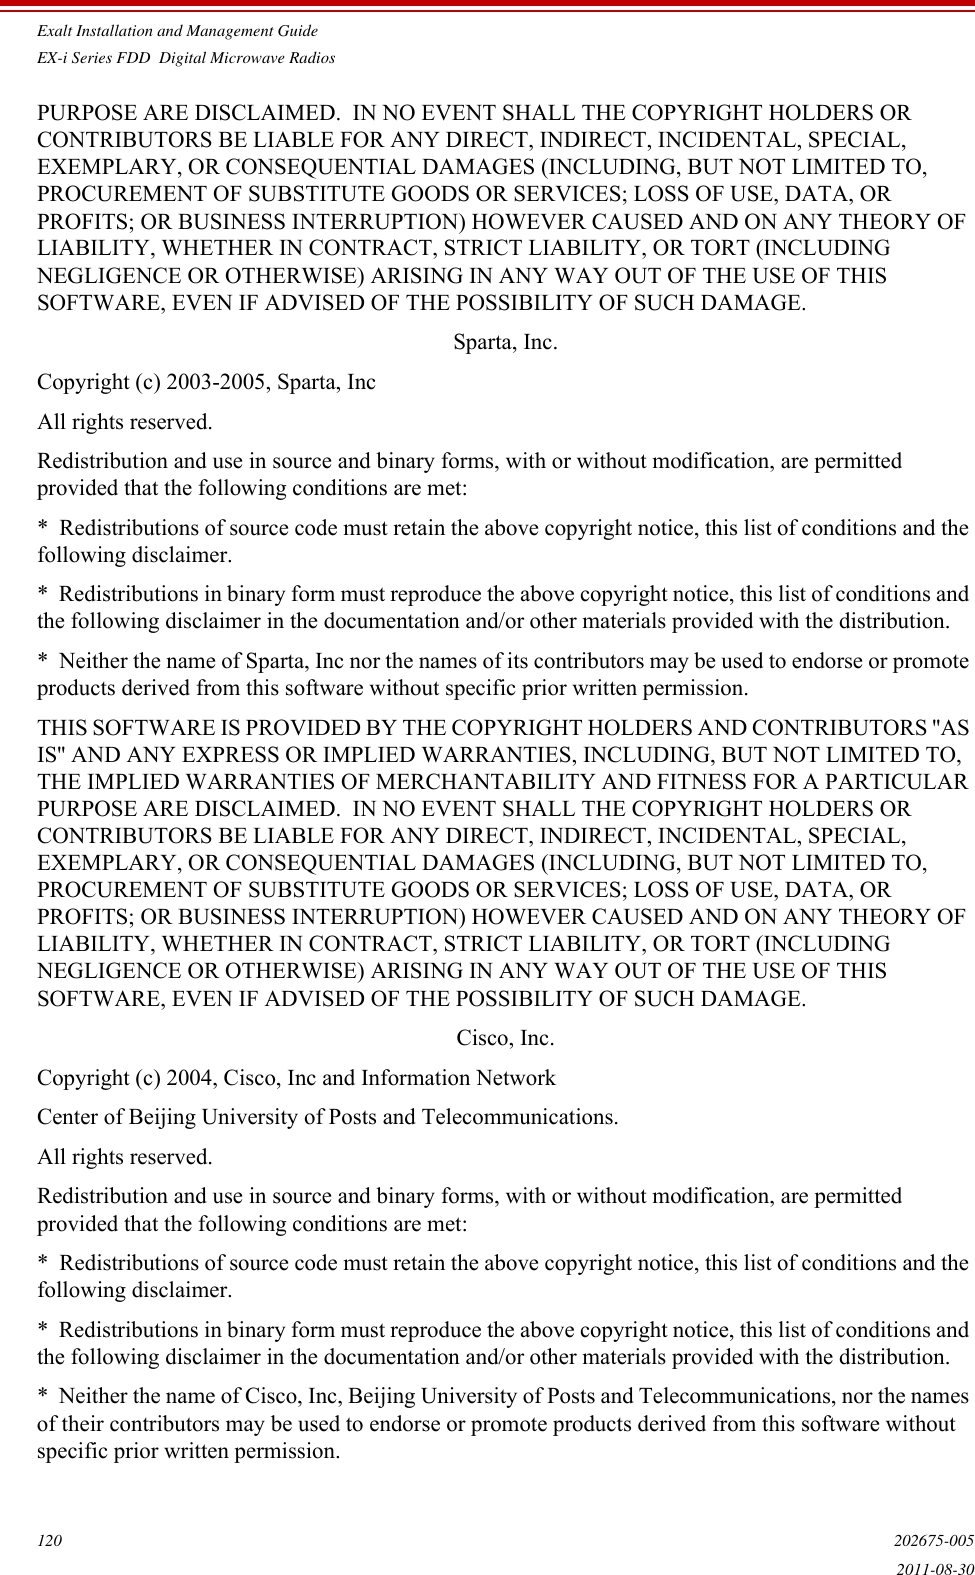 Exalt Installation and Management GuideEX-i Series FDD  Digital Microwave Radios120 202675-0052011-08-30PURPOSE ARE DISCLAIMED.  IN NO EVENT SHALL THE COPYRIGHT HOLDERS OR CONTRIBUTORS BE LIABLE FOR ANY DIRECT, INDIRECT, INCIDENTAL, SPECIAL, EXEMPLARY, OR CONSEQUENTIAL DAMAGES (INCLUDING, BUT NOT LIMITED TO, PROCUREMENT OF SUBSTITUTE GOODS OR SERVICES; LOSS OF USE, DATA, OR PROFITS; OR BUSINESS INTERRUPTION) HOWEVER CAUSED AND ON ANY THEORY OF LIABILITY, WHETHER IN CONTRACT, STRICT LIABILITY, OR TORT (INCLUDING NEGLIGENCE OR OTHERWISE) ARISING IN ANY WAY OUT OF THE USE OF THIS SOFTWARE, EVEN IF ADVISED OF THE POSSIBILITY OF SUCH DAMAGE.Sparta, Inc.Copyright (c) 2003-2005, Sparta, IncAll rights reserved.Redistribution and use in source and binary forms, with or without modification, are permitted provided that the following conditions are met:*  Redistributions of source code must retain the above copyright notice, this list of conditions and the following disclaimer.*  Redistributions in binary form must reproduce the above copyright notice, this list of conditions and the following disclaimer in the documentation and/or other materials provided with the distribution.*  Neither the name of Sparta, Inc nor the names of its contributors may be used to endorse or promote products derived from this software without specific prior written permission.THIS SOFTWARE IS PROVIDED BY THE COPYRIGHT HOLDERS AND CONTRIBUTORS &apos;&apos;AS IS&apos;&apos; AND ANY EXPRESS OR IMPLIED WARRANTIES, INCLUDING, BUT NOT LIMITED TO, THE IMPLIED WARRANTIES OF MERCHANTABILITY AND FITNESS FOR A PARTICULAR PURPOSE ARE DISCLAIMED.  IN NO EVENT SHALL THE COPYRIGHT HOLDERS OR CONTRIBUTORS BE LIABLE FOR ANY DIRECT, INDIRECT, INCIDENTAL, SPECIAL, EXEMPLARY, OR CONSEQUENTIAL DAMAGES (INCLUDING, BUT NOT LIMITED TO, PROCUREMENT OF SUBSTITUTE GOODS OR SERVICES; LOSS OF USE, DATA, OR PROFITS; OR BUSINESS INTERRUPTION) HOWEVER CAUSED AND ON ANY THEORY OF LIABILITY, WHETHER IN CONTRACT, STRICT LIABILITY, OR TORT (INCLUDING NEGLIGENCE OR OTHERWISE) ARISING IN ANY WAY OUT OF THE USE OF THIS SOFTWARE, EVEN IF ADVISED OF THE POSSIBILITY OF SUCH DAMAGE.Cisco, Inc.Copyright (c) 2004, Cisco, Inc and Information NetworkCenter of Beijing University of Posts and Telecommunications.All rights reserved.Redistribution and use in source and binary forms, with or without modification, are permitted provided that the following conditions are met:*  Redistributions of source code must retain the above copyright notice, this list of conditions and the following disclaimer.*  Redistributions in binary form must reproduce the above copyright notice, this list of conditions and the following disclaimer in the documentation and/or other materials provided with the distribution.*  Neither the name of Cisco, Inc, Beijing University of Posts and Telecommunications, nor the names of their contributors may be used to endorse or promote products derived from this software without specific prior written permission.